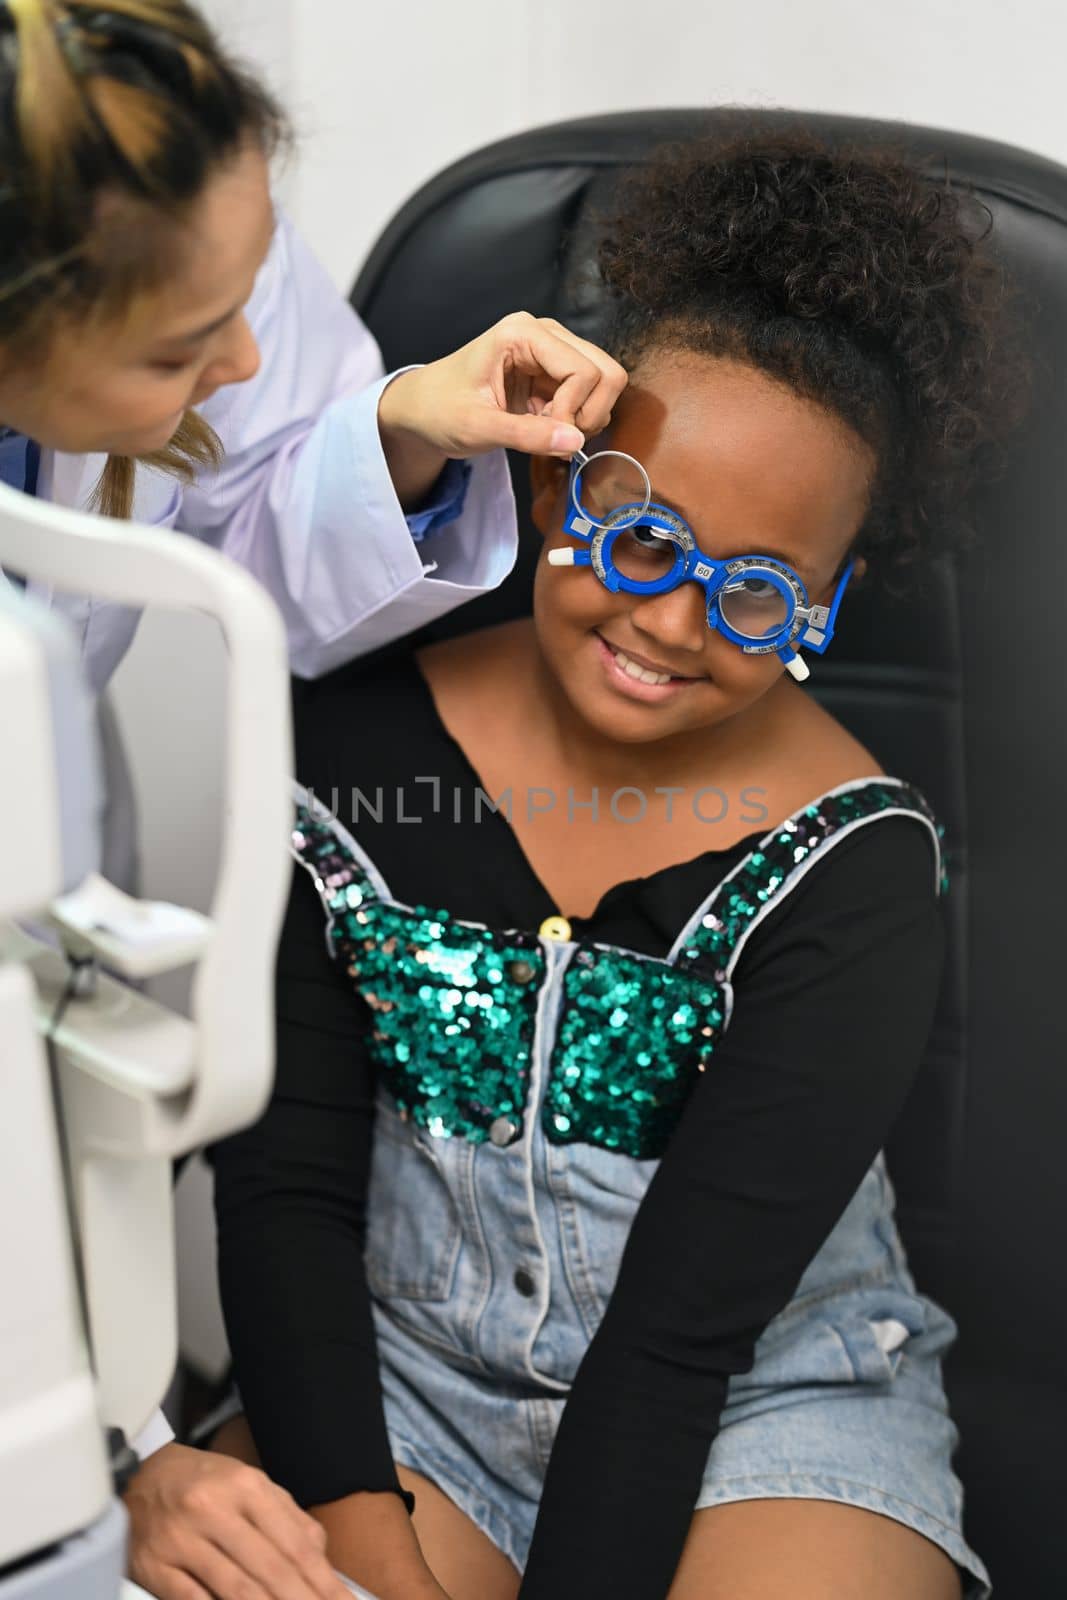 Smiling girl checking eye vision with ophthalmologist for spectacles glasses. Eye health check, ophthalmology concept.